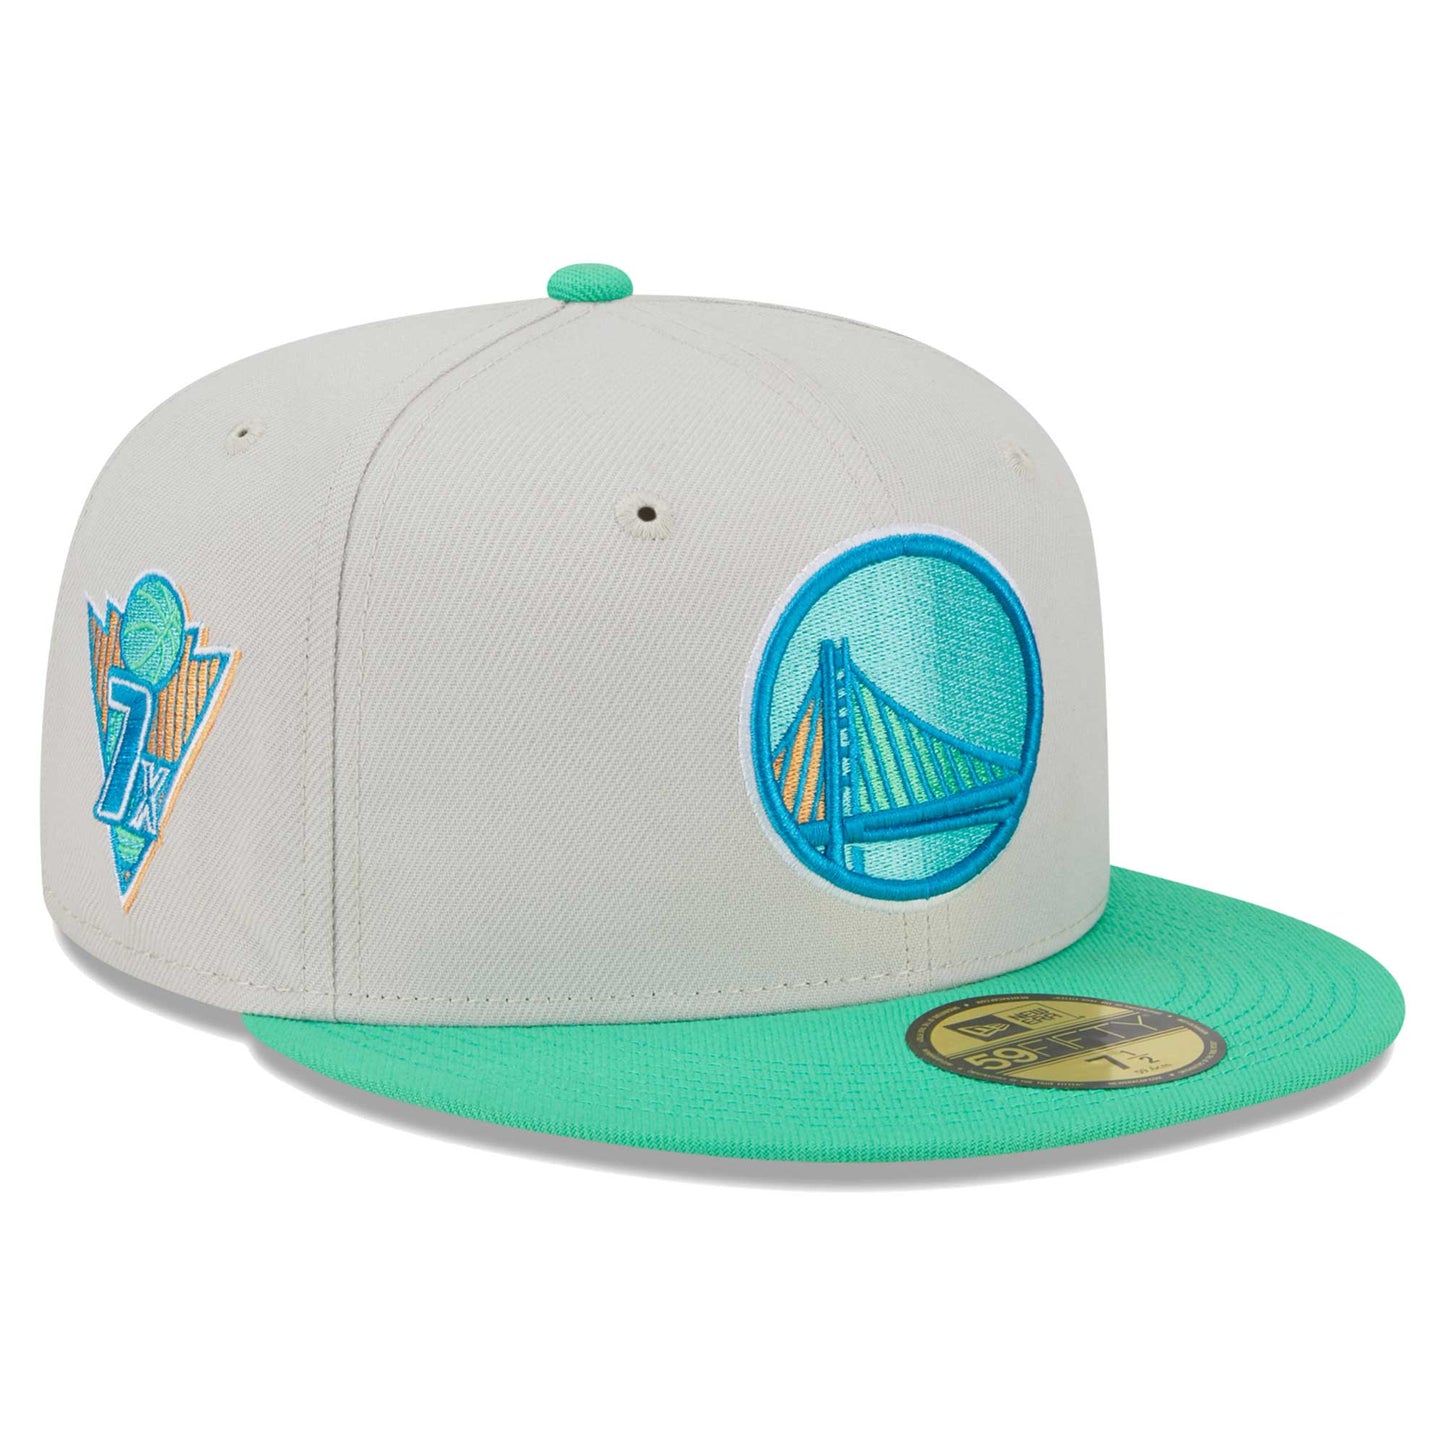 Golden State Warriors Cream and Green 59FIFTY Fitted Hat - Tan